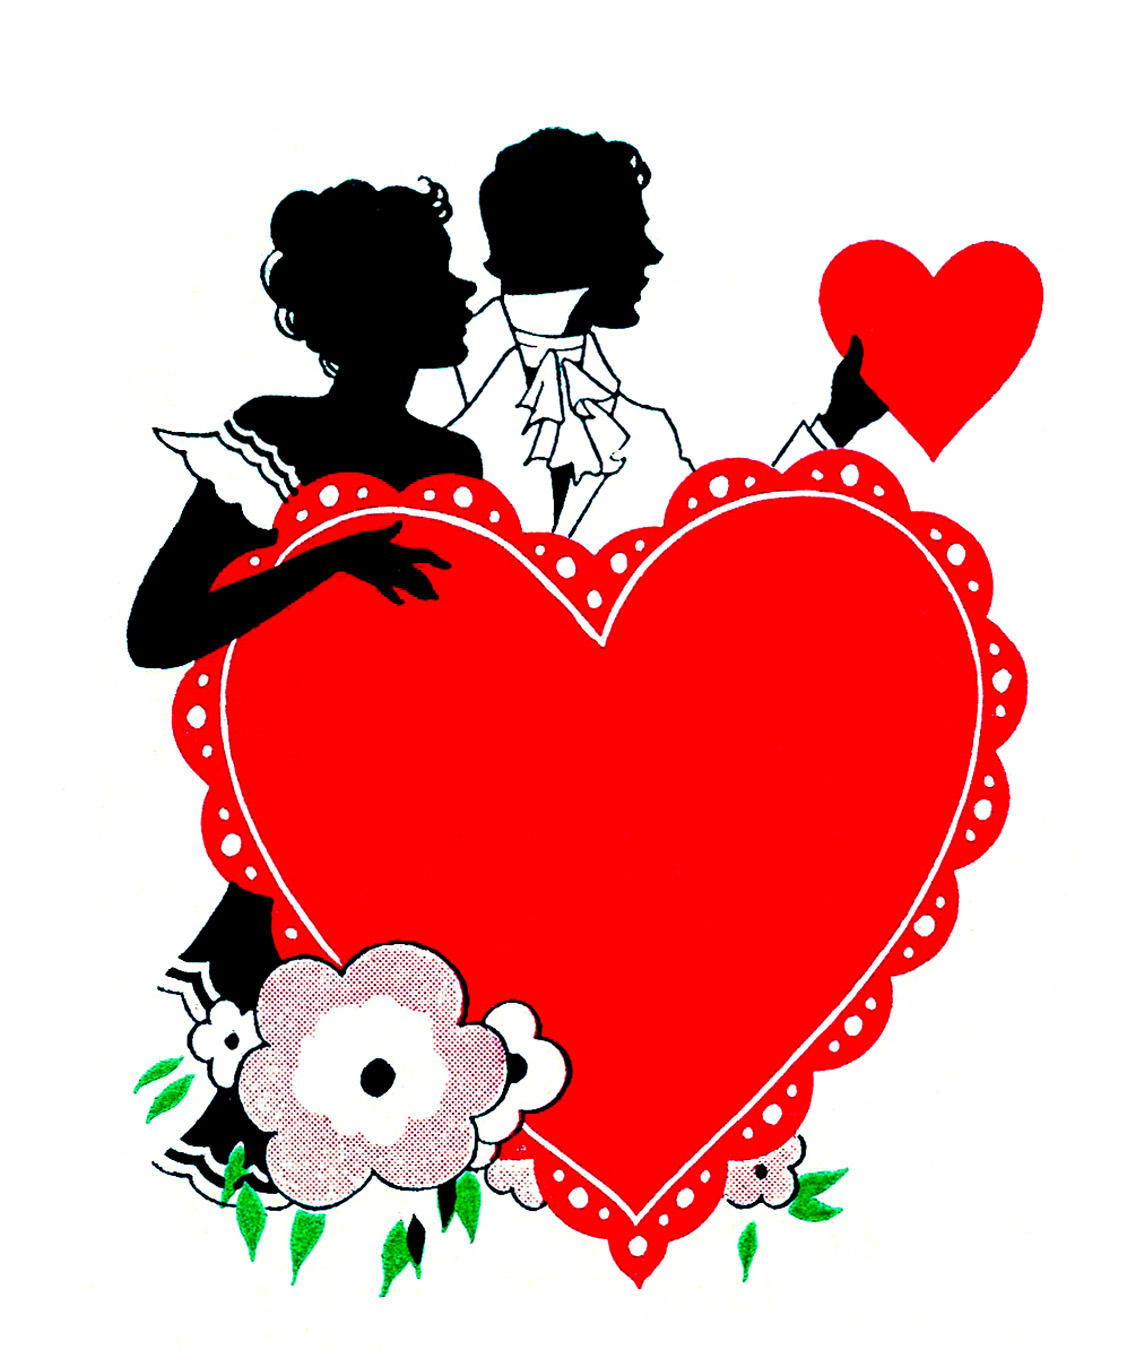 couple dancing clipart black and white heart